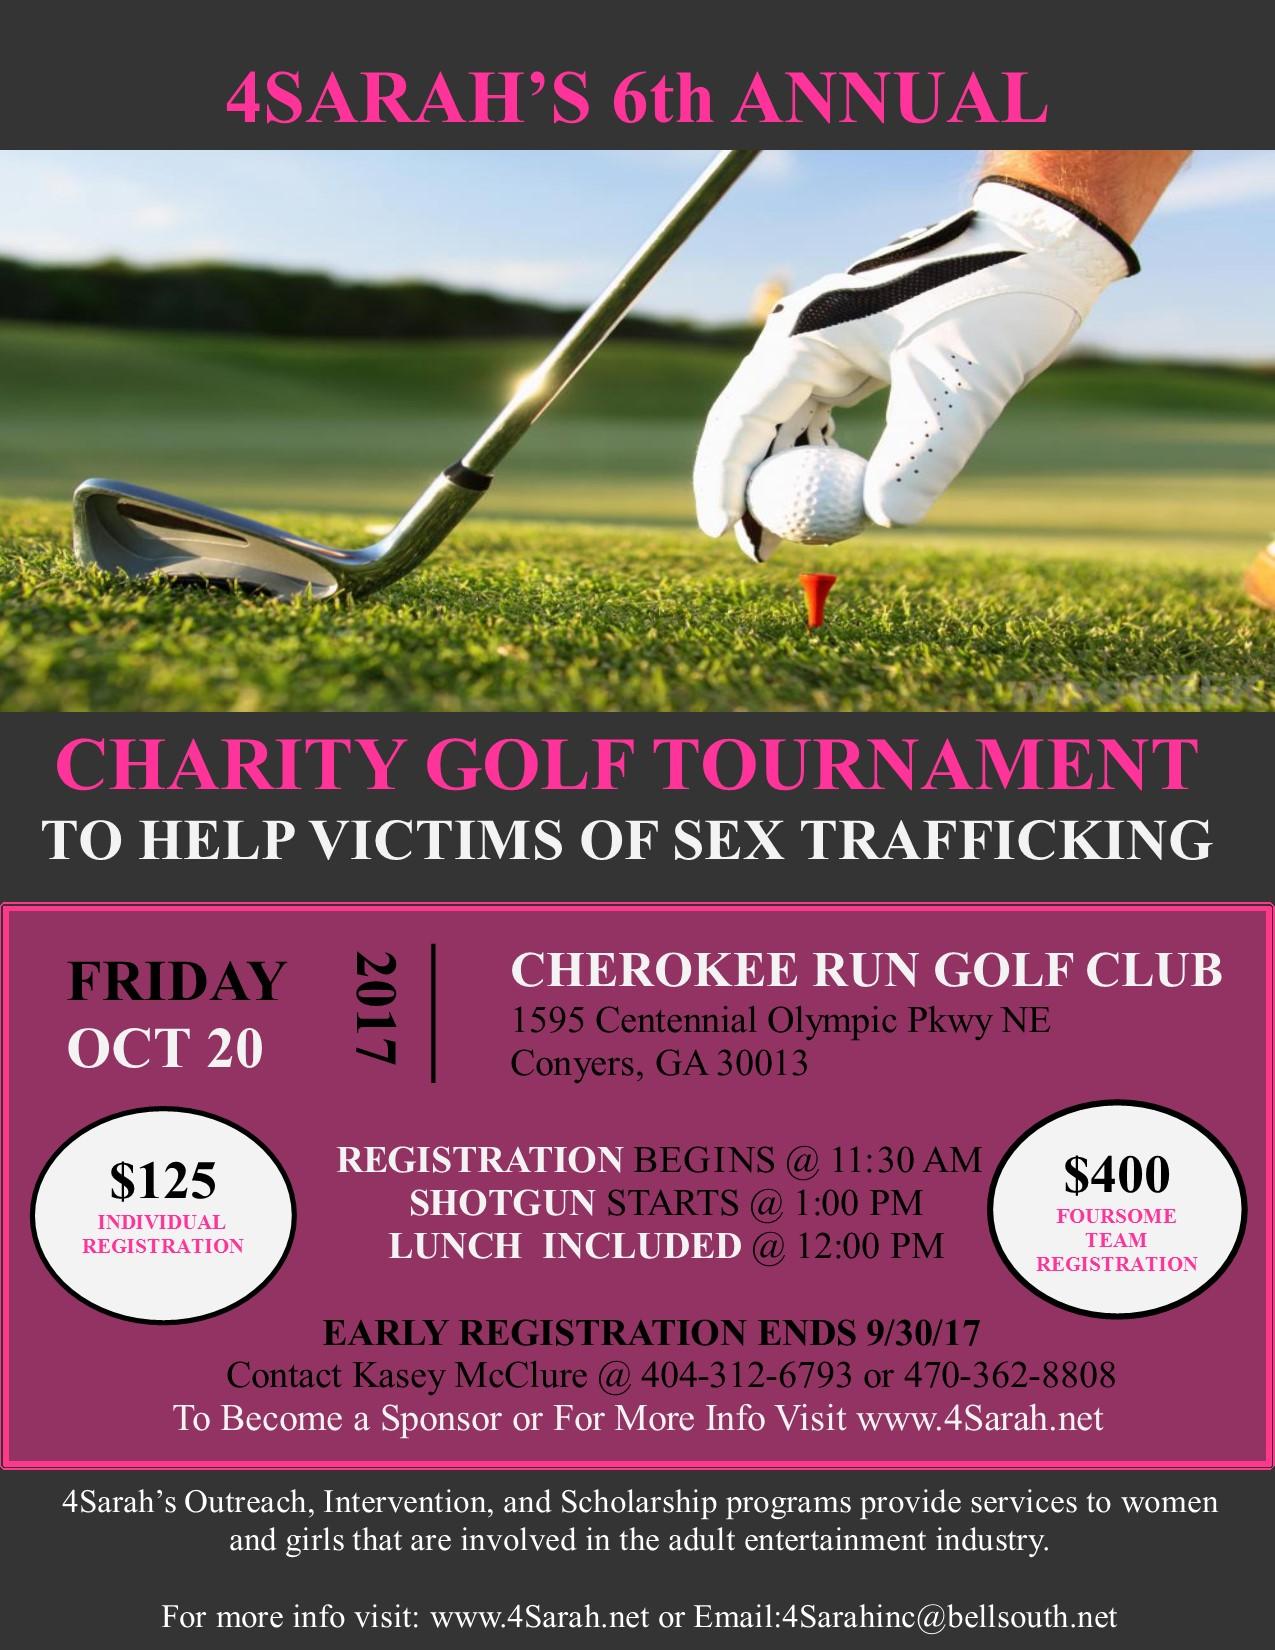 4Sarah's 7th Annual "Stop Sex Trafficking" Charity Golf Tournament